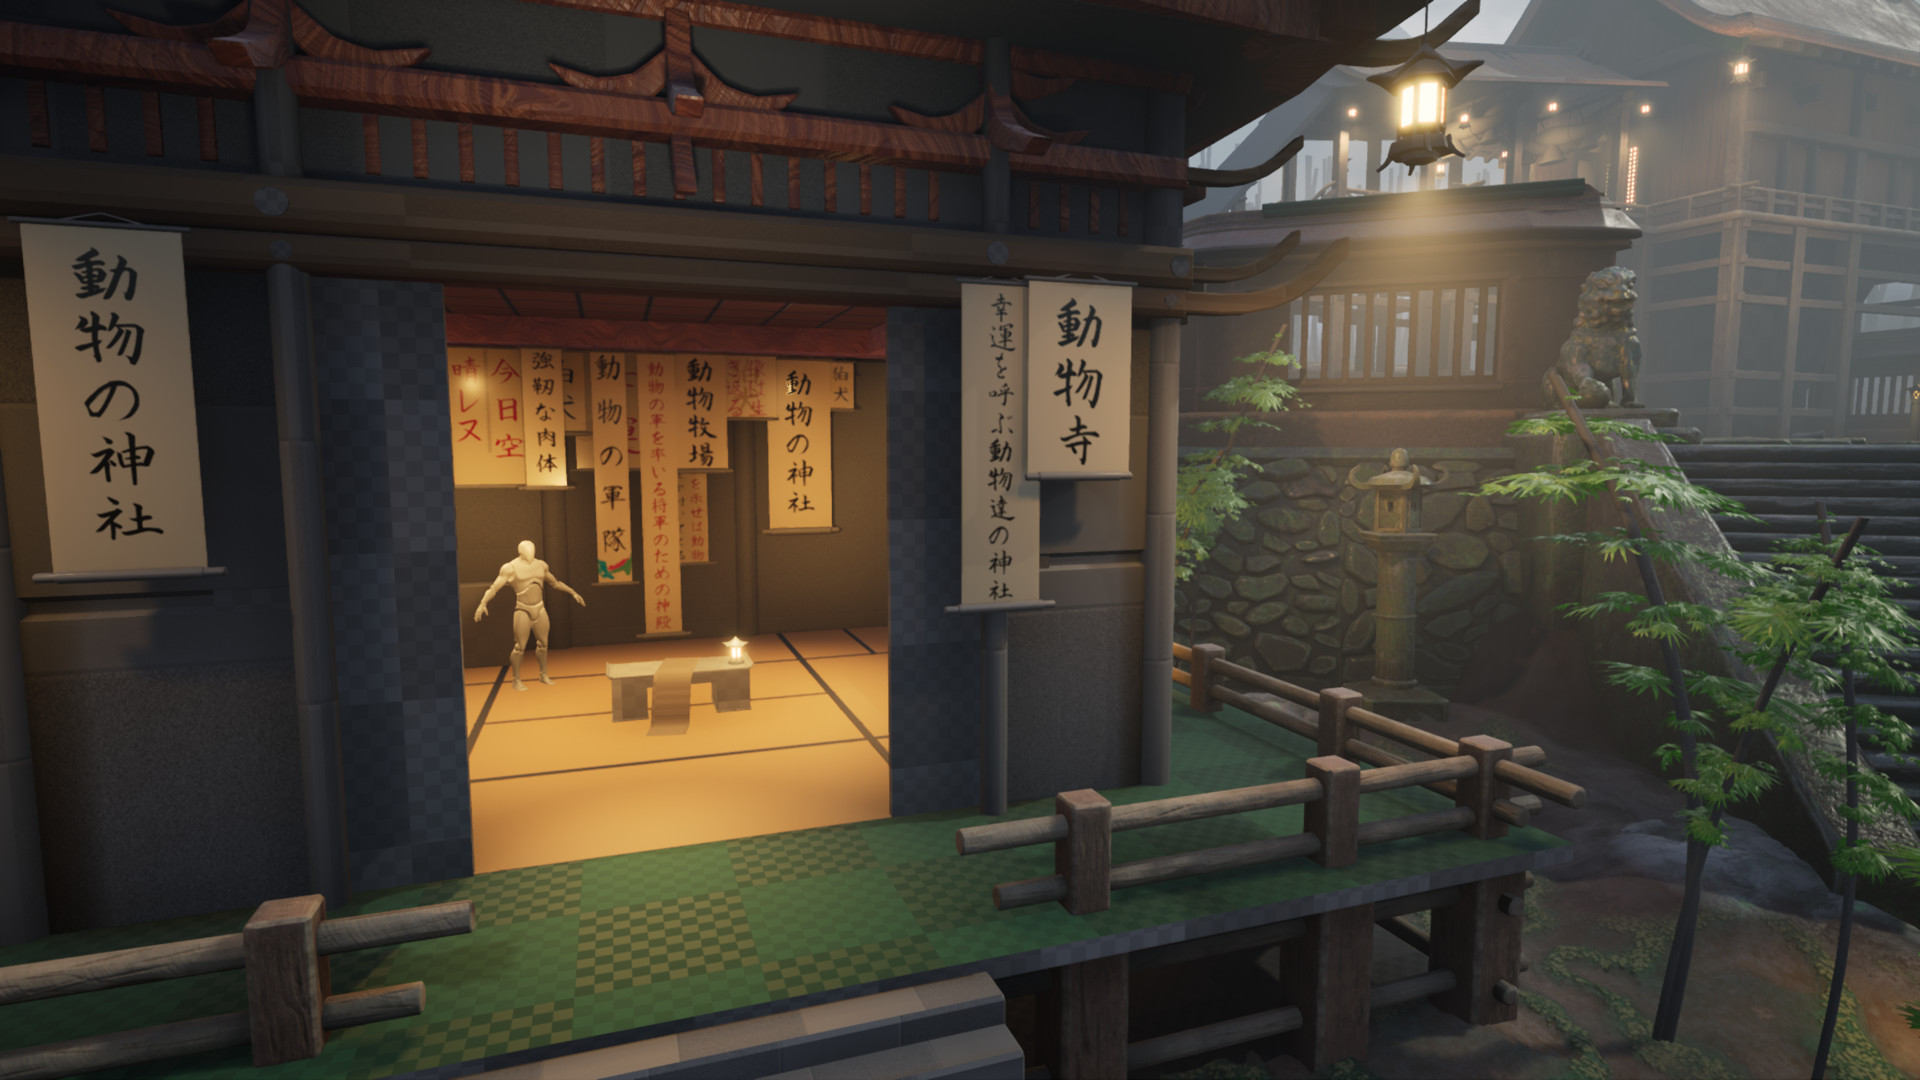 Look to the inside of the calligraphers hut. The platform it sits on is still a green, placeholder checkerboard. There are now lots of scrolls with Japanese writings and fortunes on them.